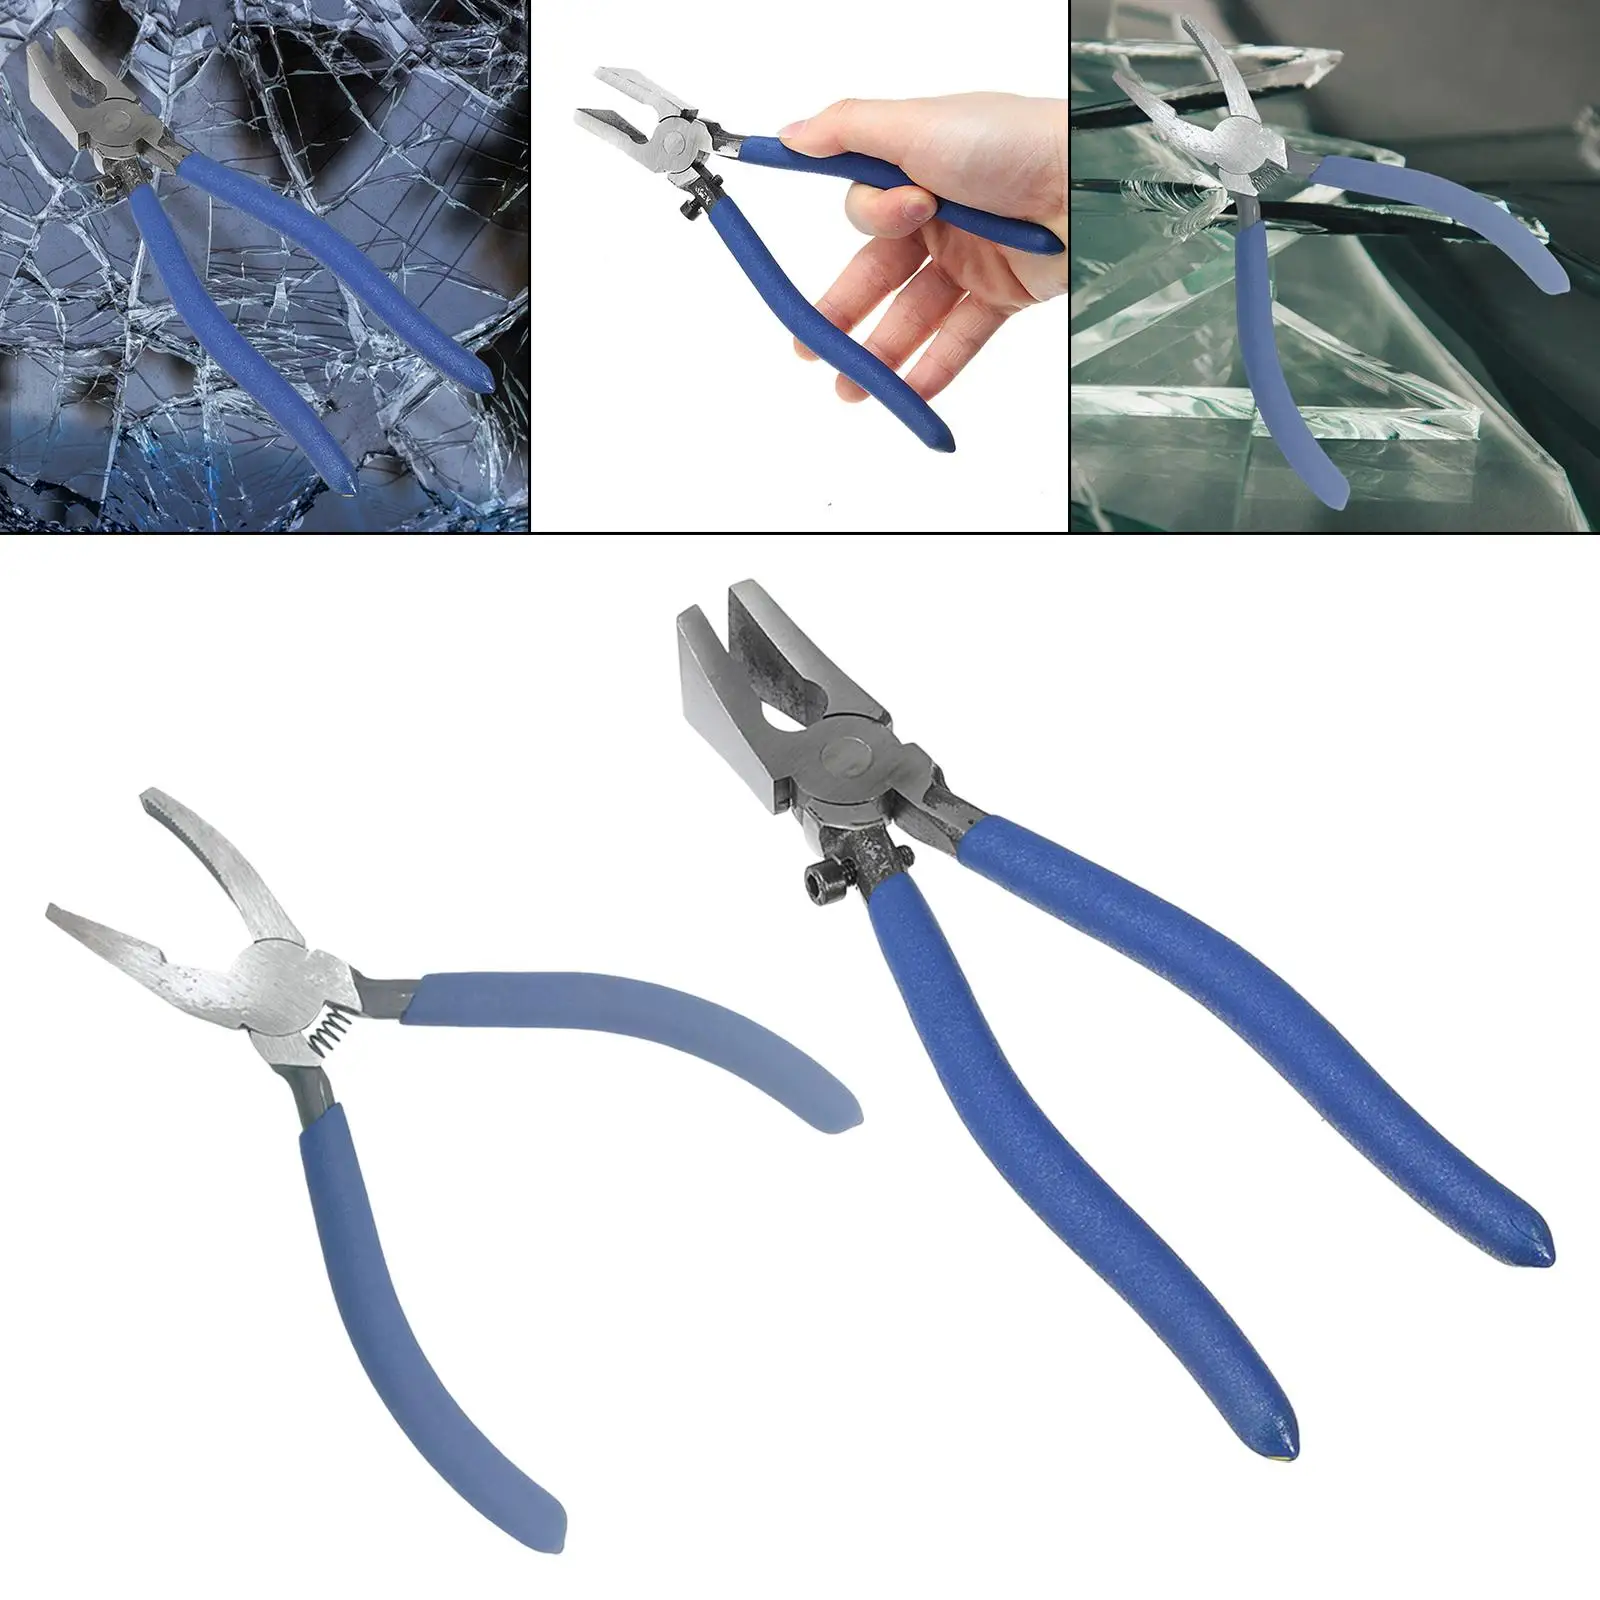 Carbon Steel Key Fob Plier, Breaking Trimming Tool flat Glass Running Pliers with Curved Jaws, for Mosaics Hardware Install